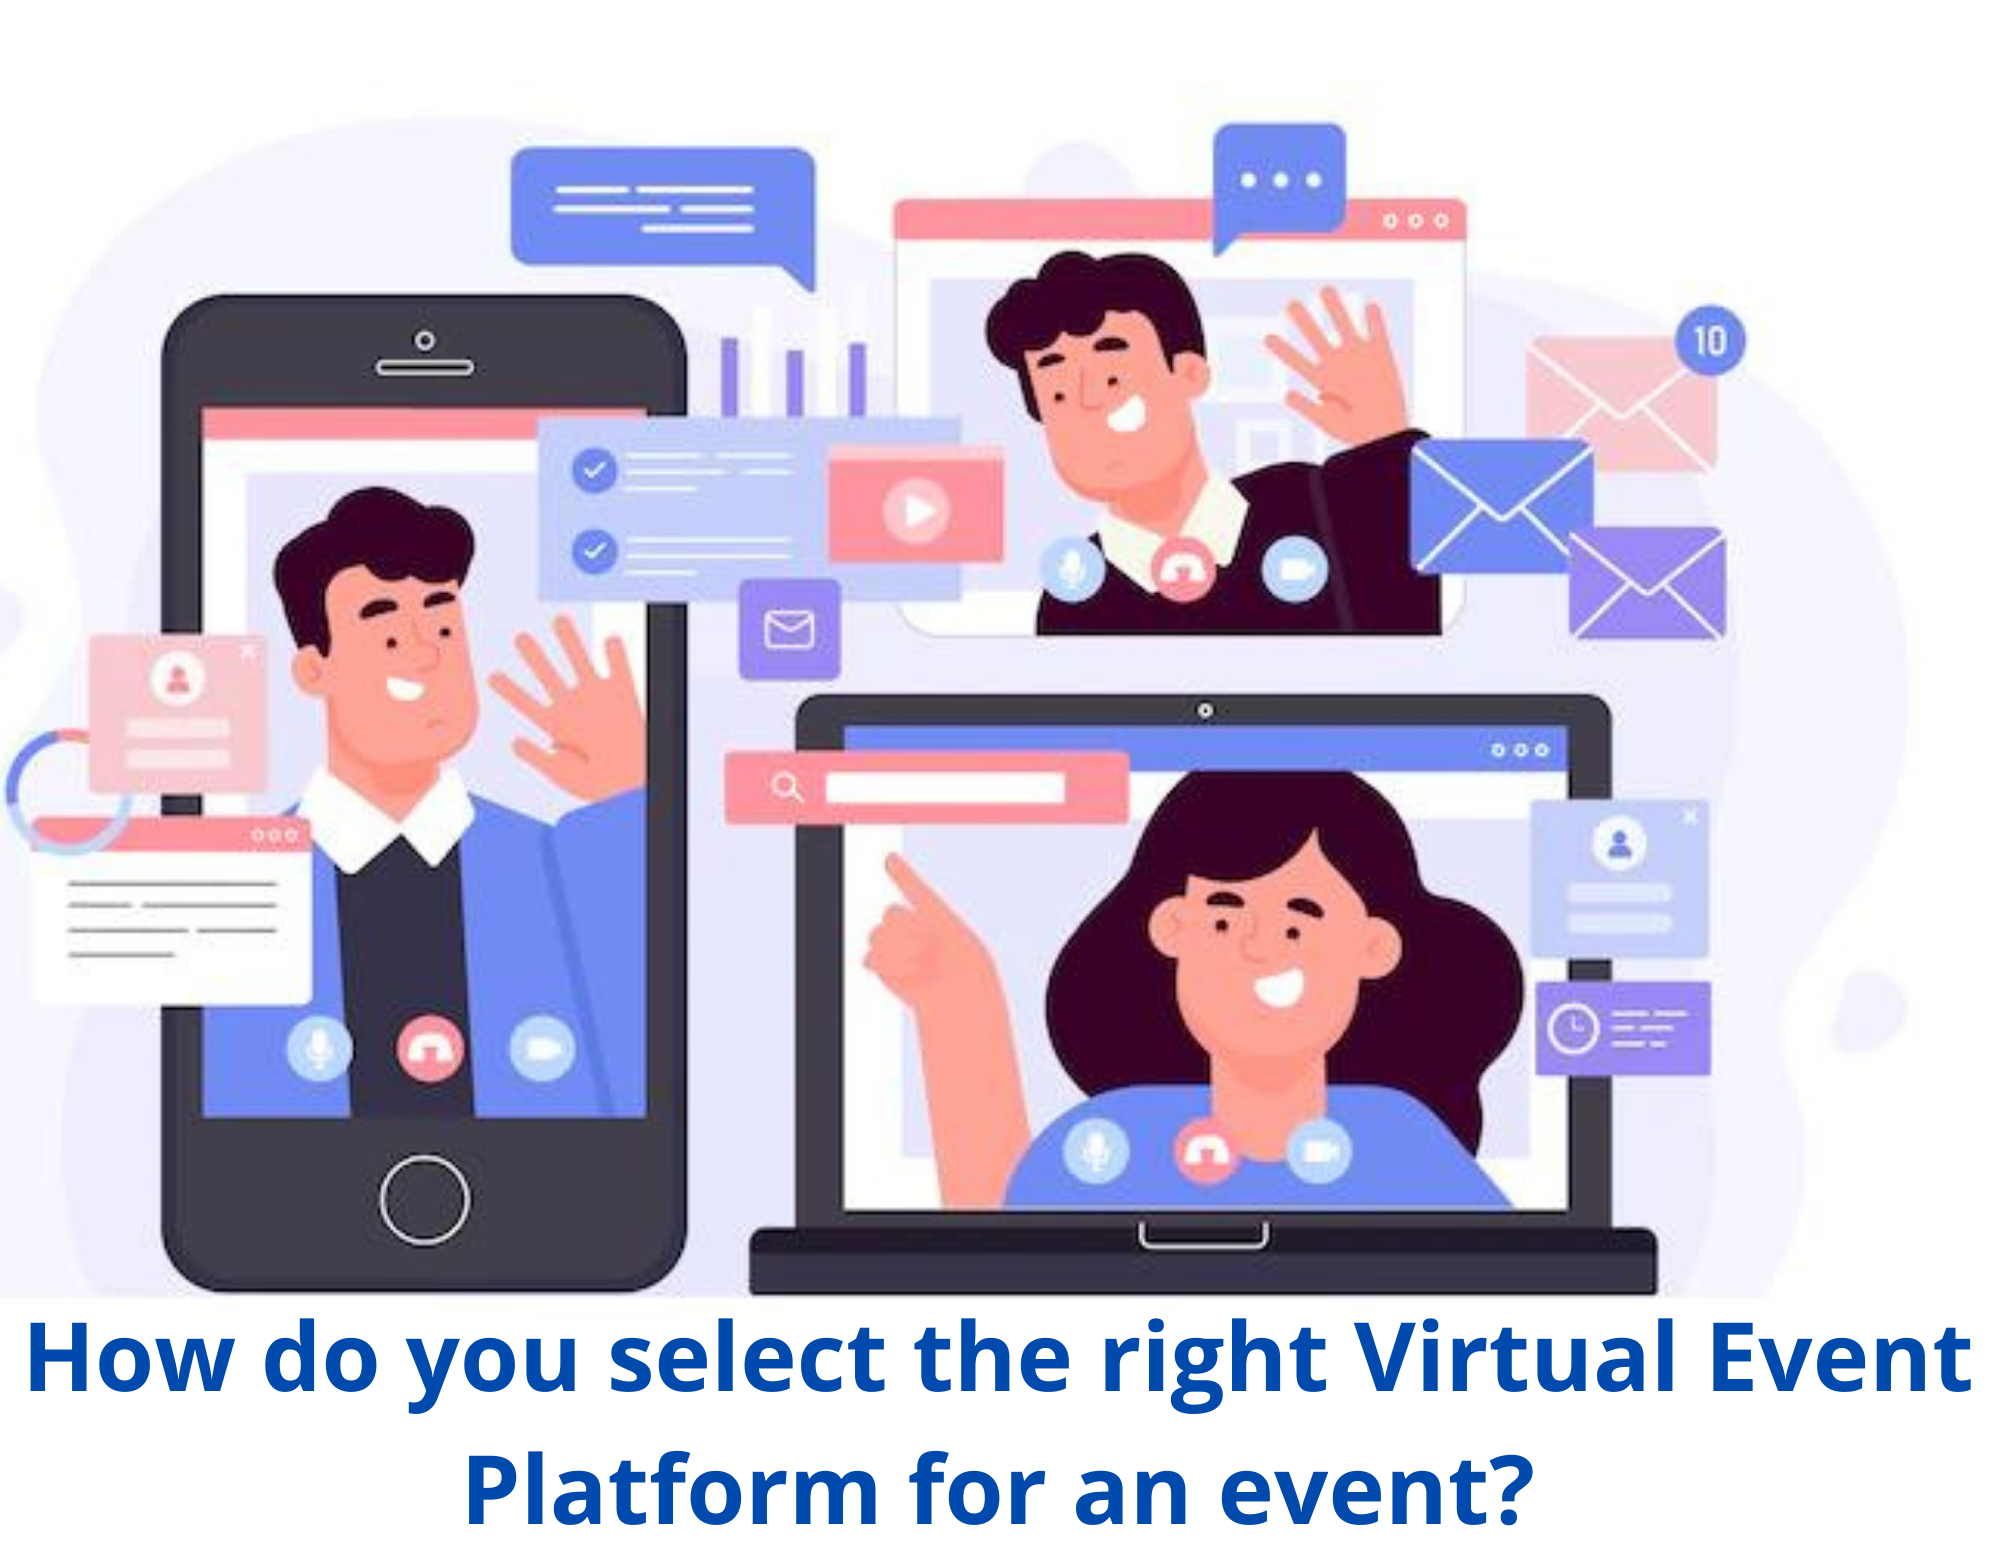 How do you select the right Virtual Event Platform for an event?